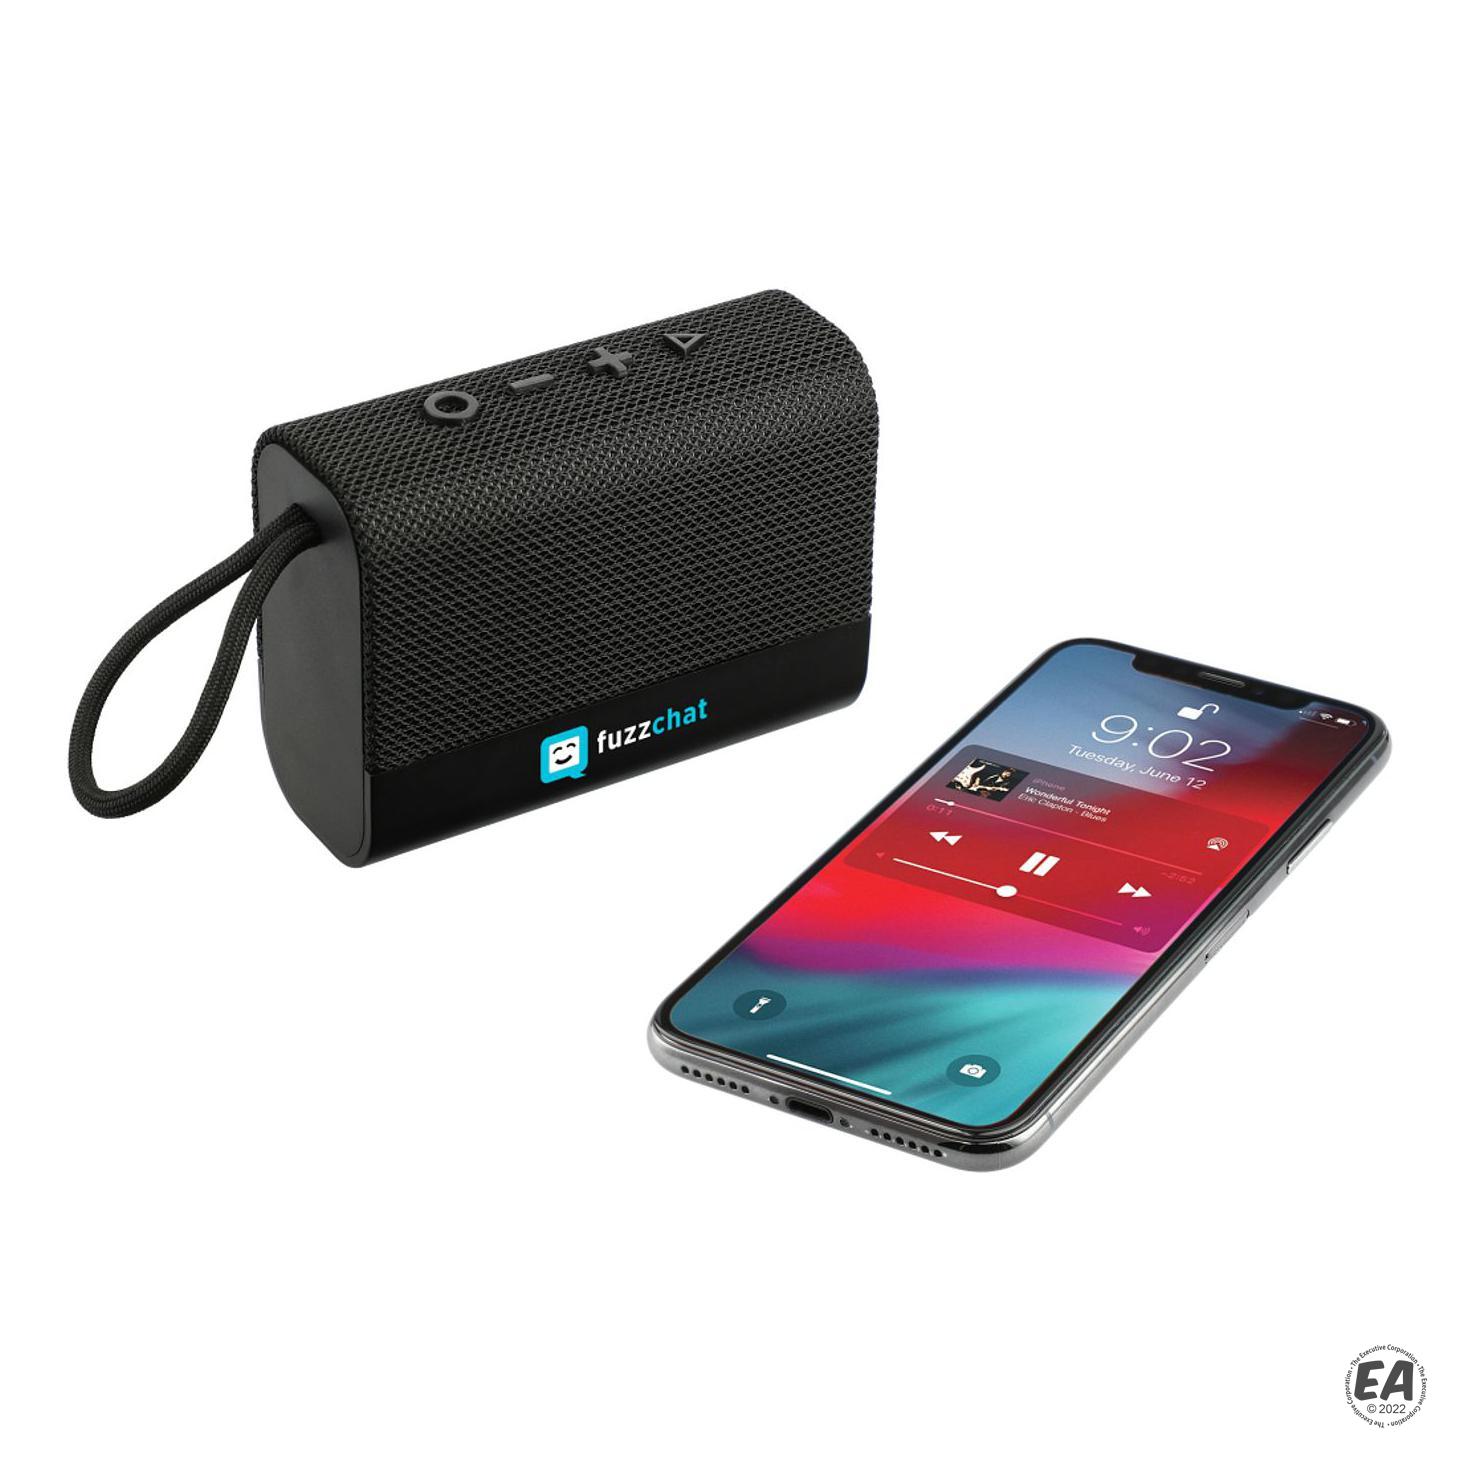 Fabric Waterproof Bluetooth Speaker - Personalization Available